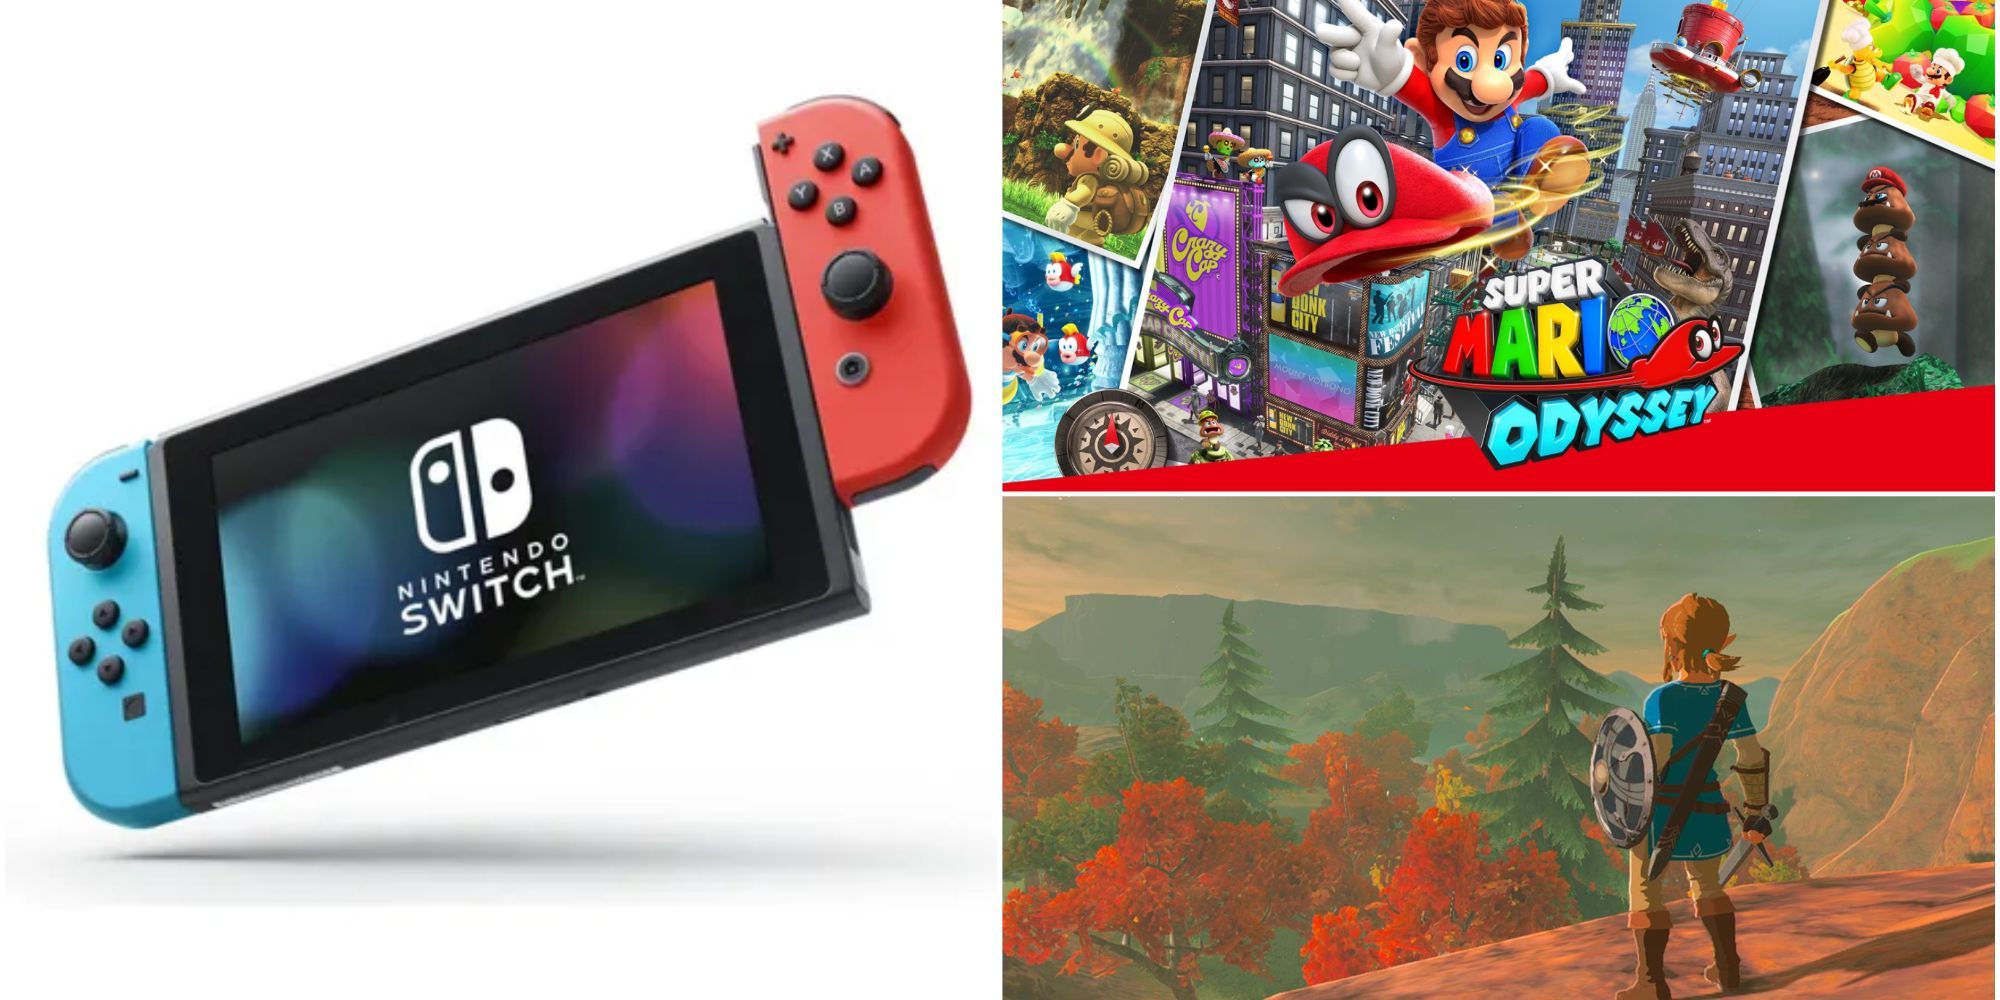 A Nintendo Switch with the right joycon about to click in, beside the Super Mario Odyssey cover and a shot from Breath of the Wild of Link looking out over a forest